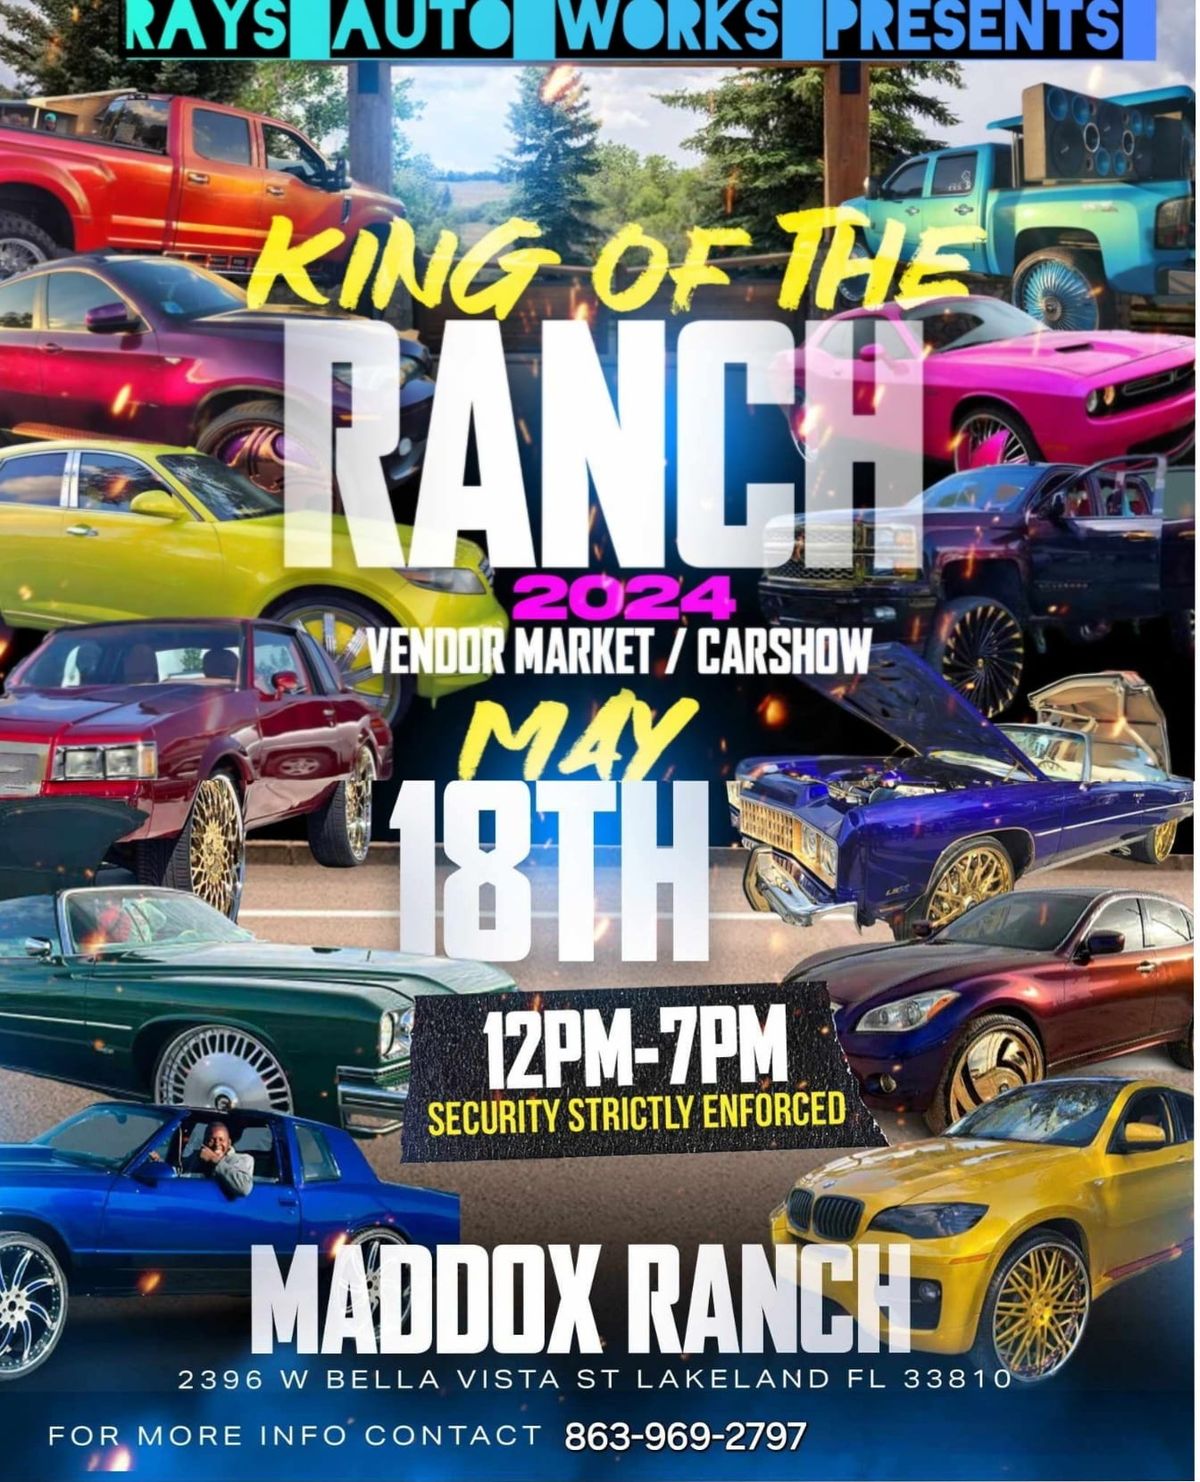 King of the Ranch 2024 Vendor Market & Carshow